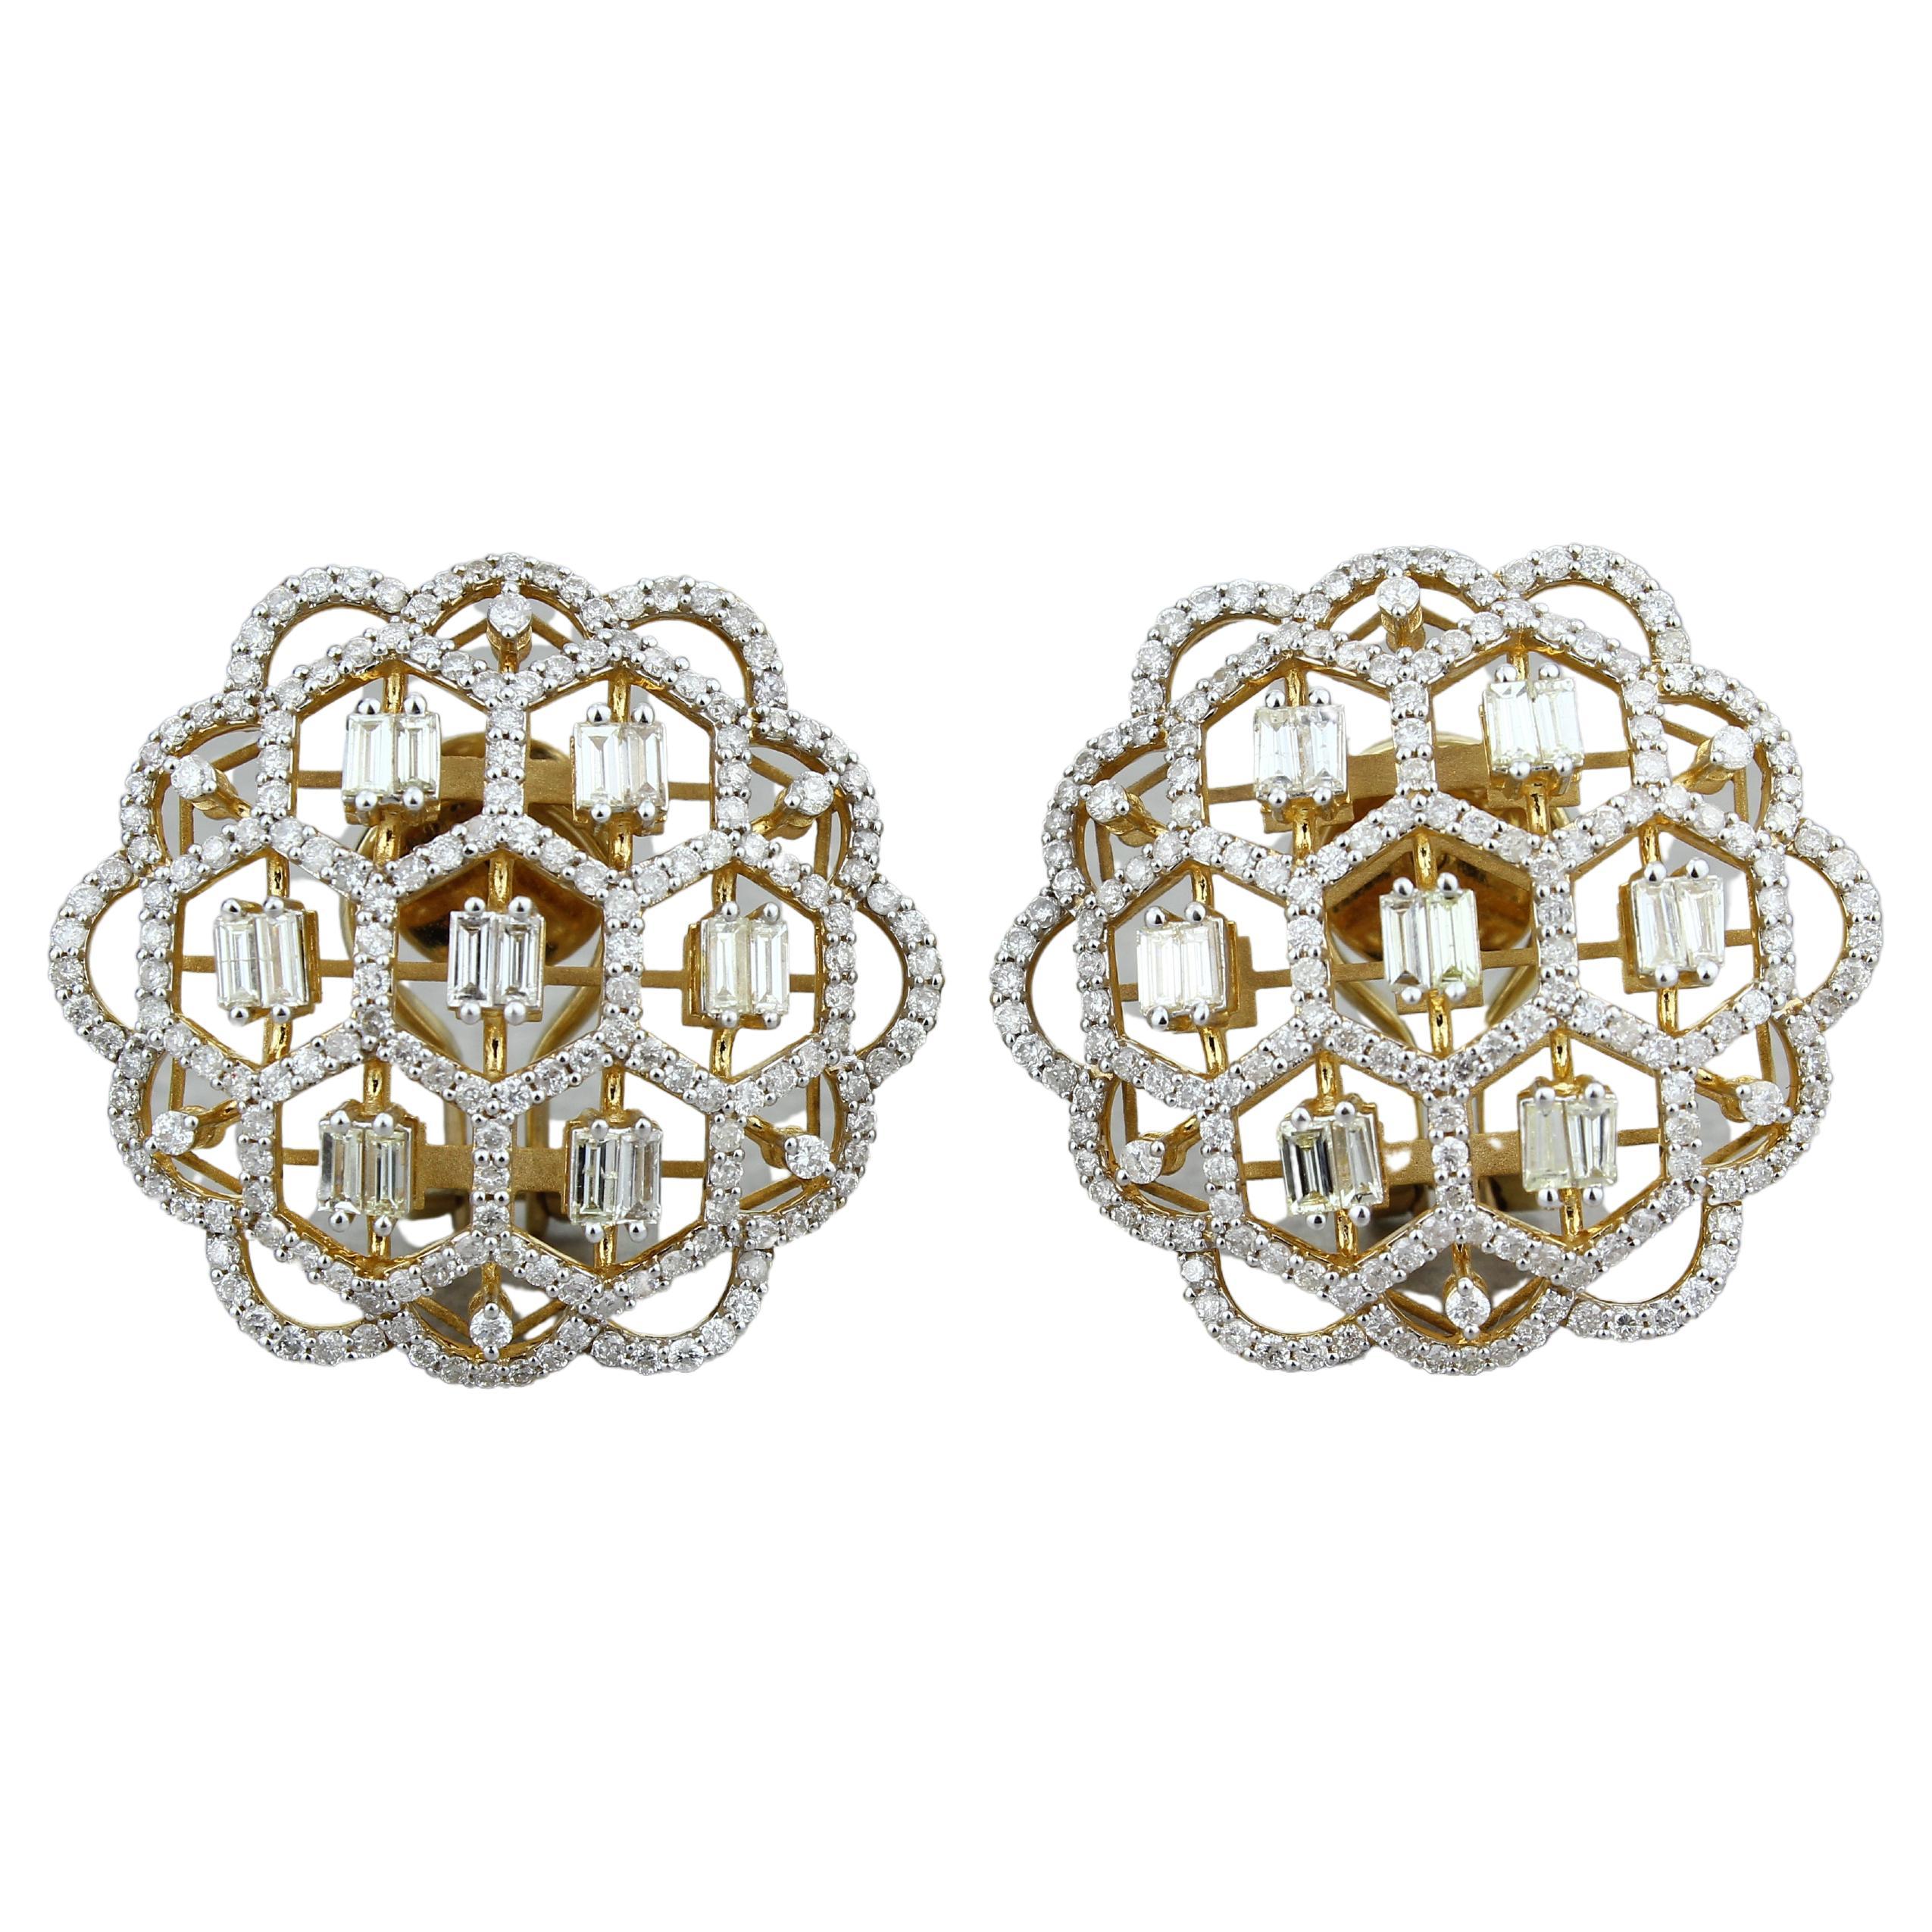 Floral Stud Earrings with Baguettes & Round Diamonds set in 18k Solid Gold